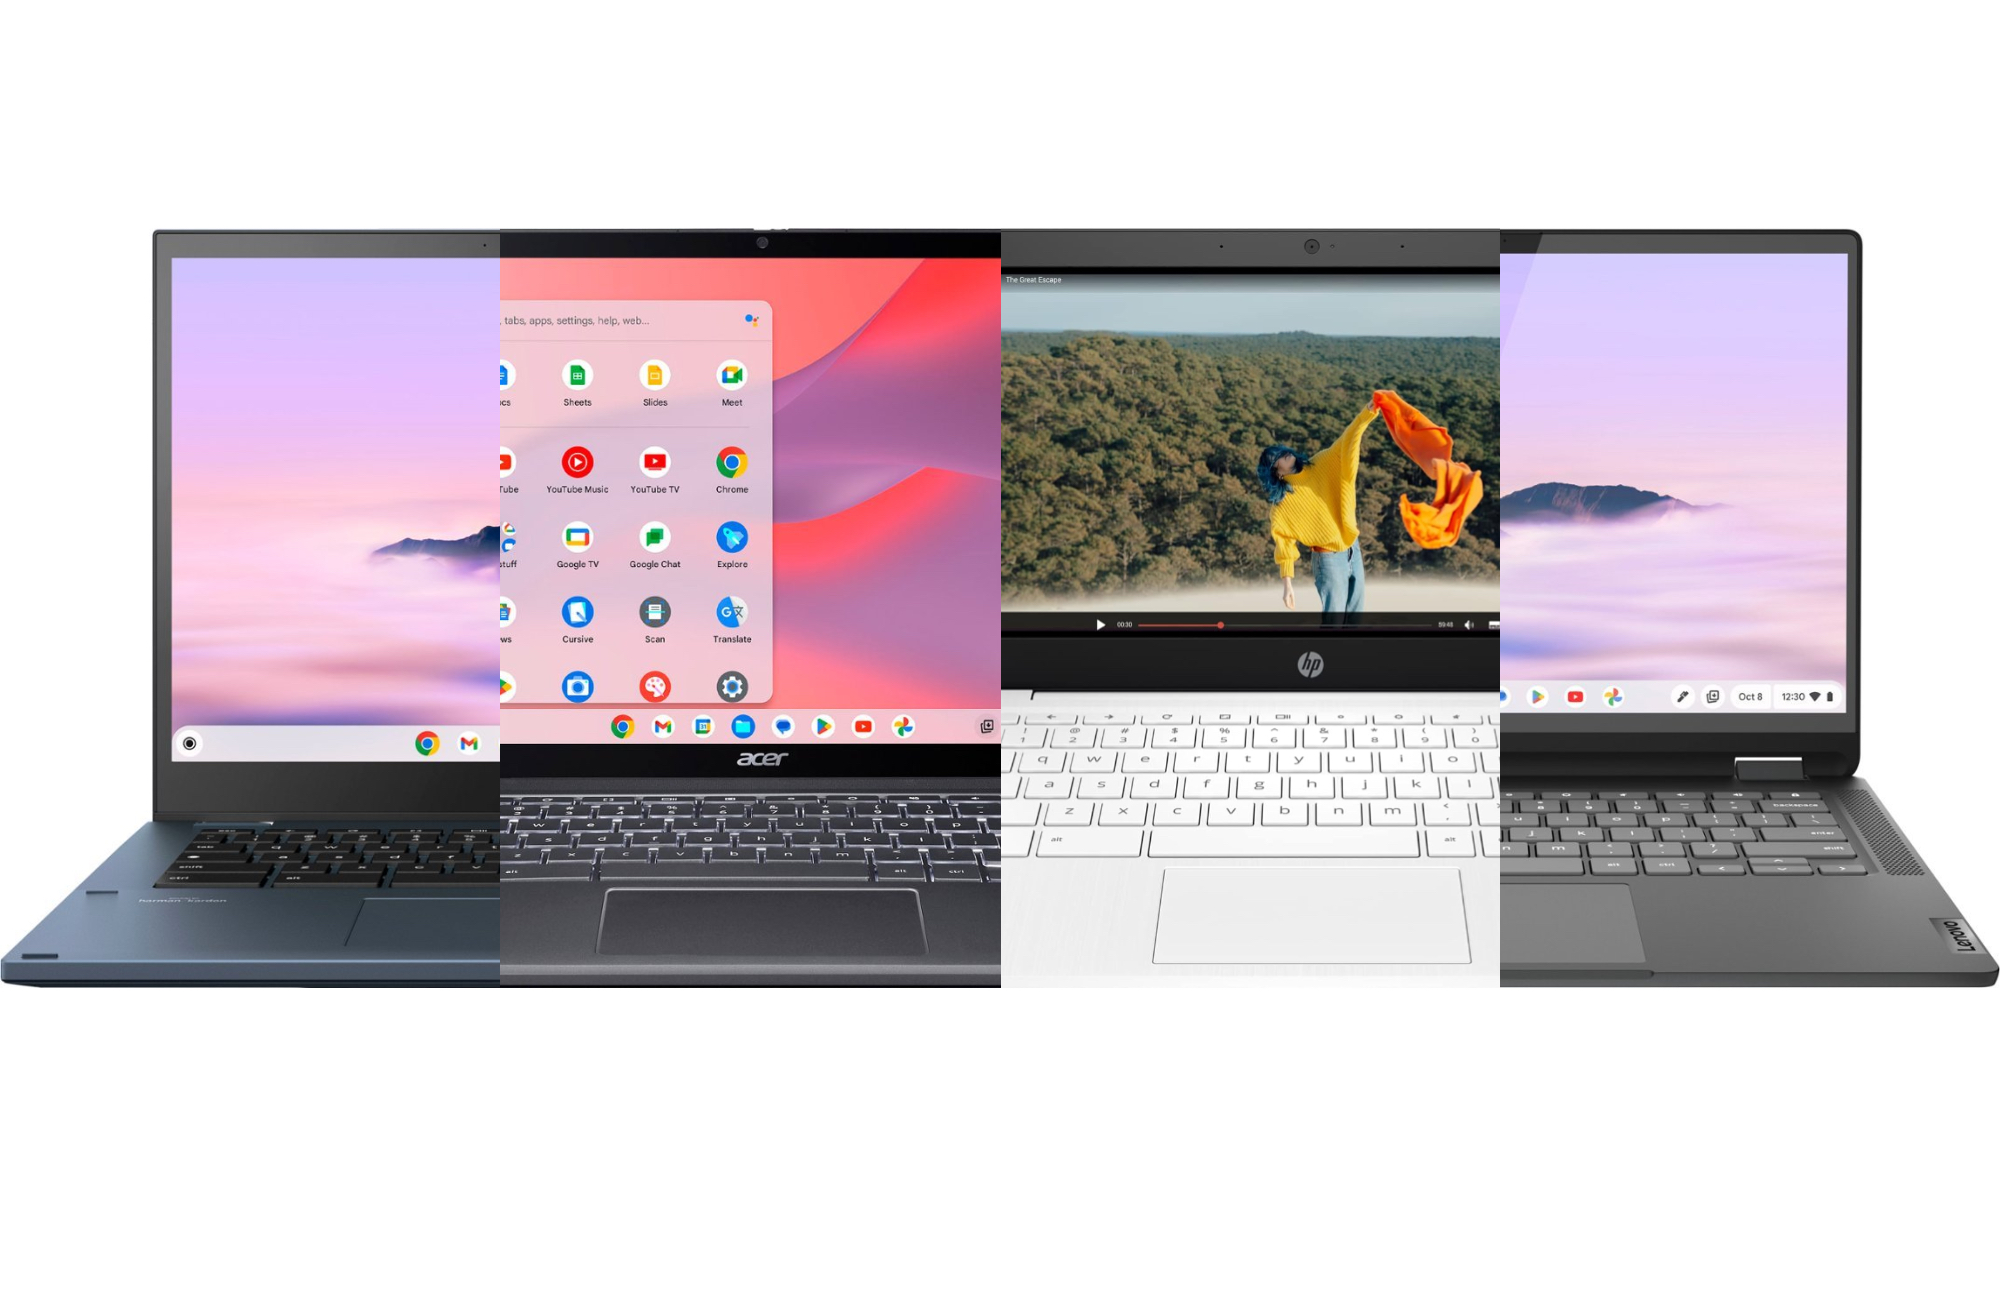 The best Chromebooks for students on a plain white background.